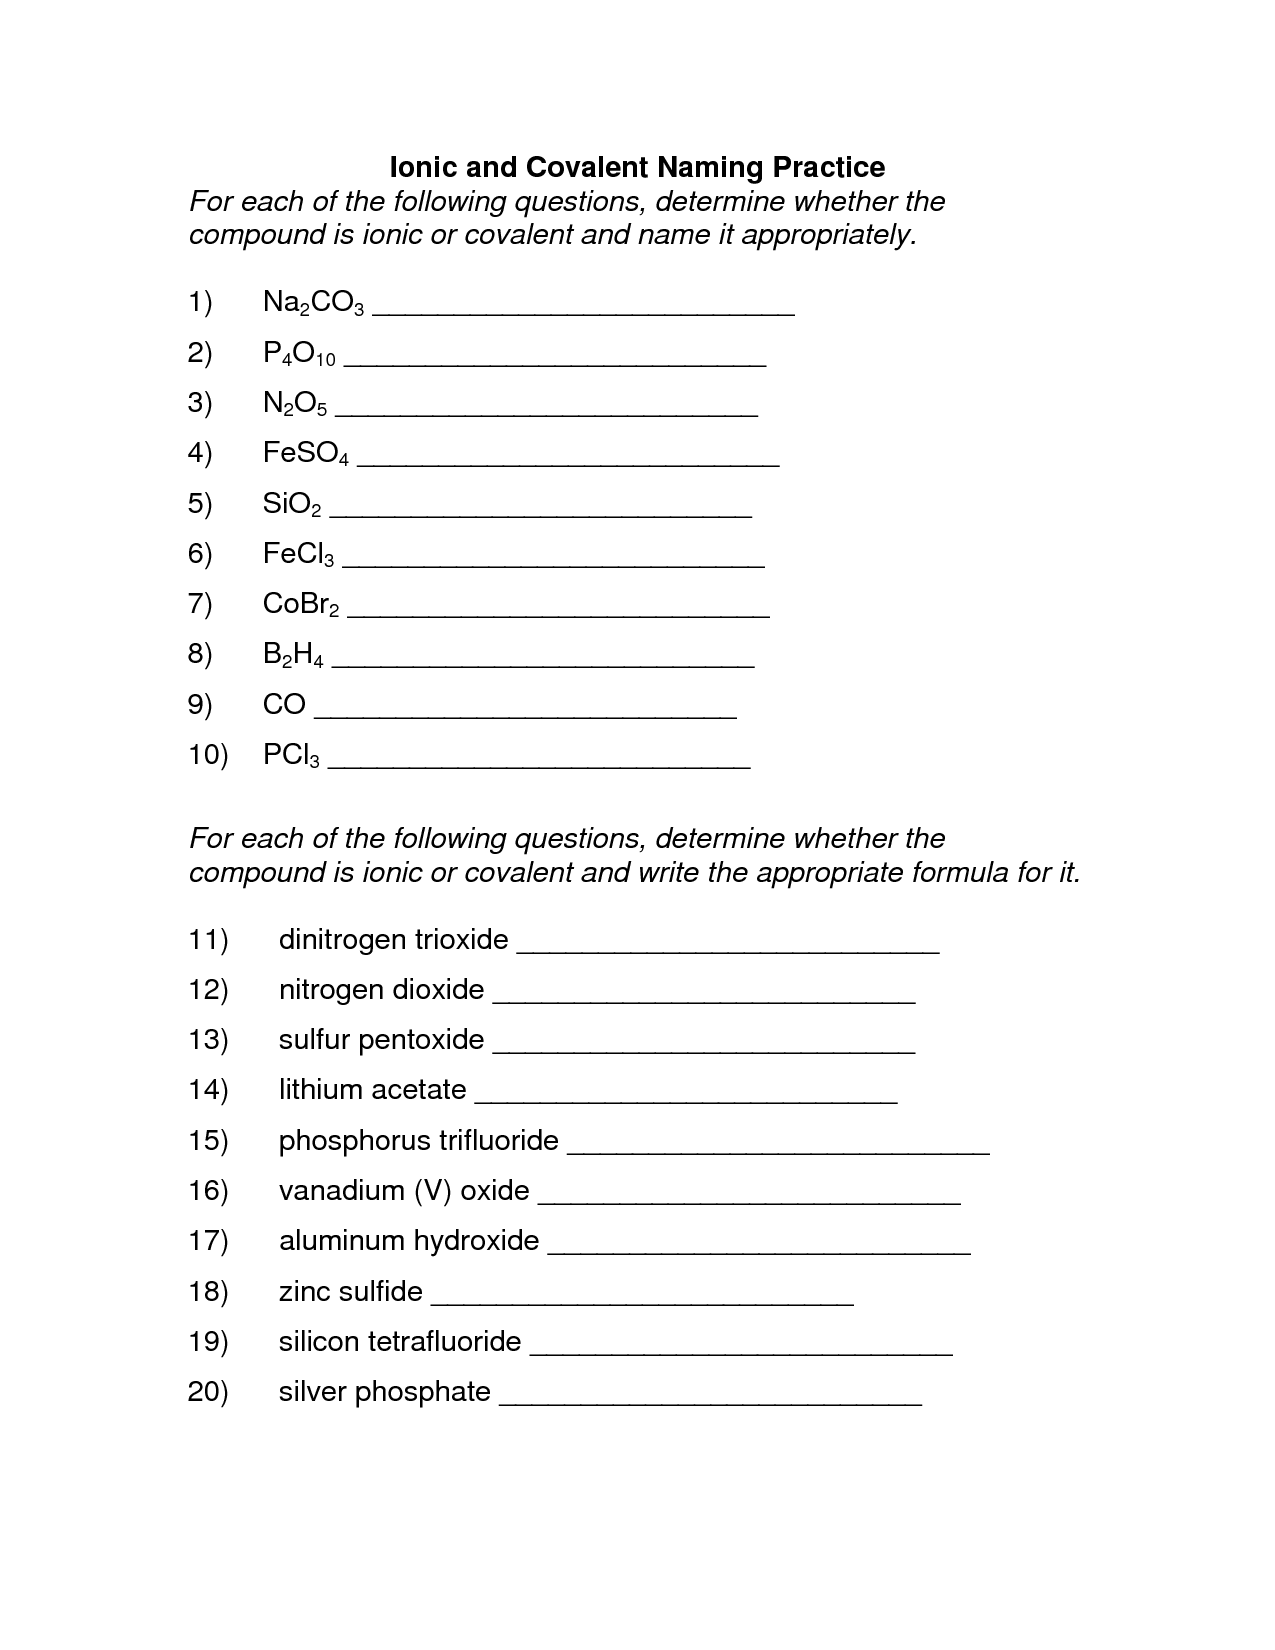 Naming Ionic and Covalent Compounds Worksheet Image